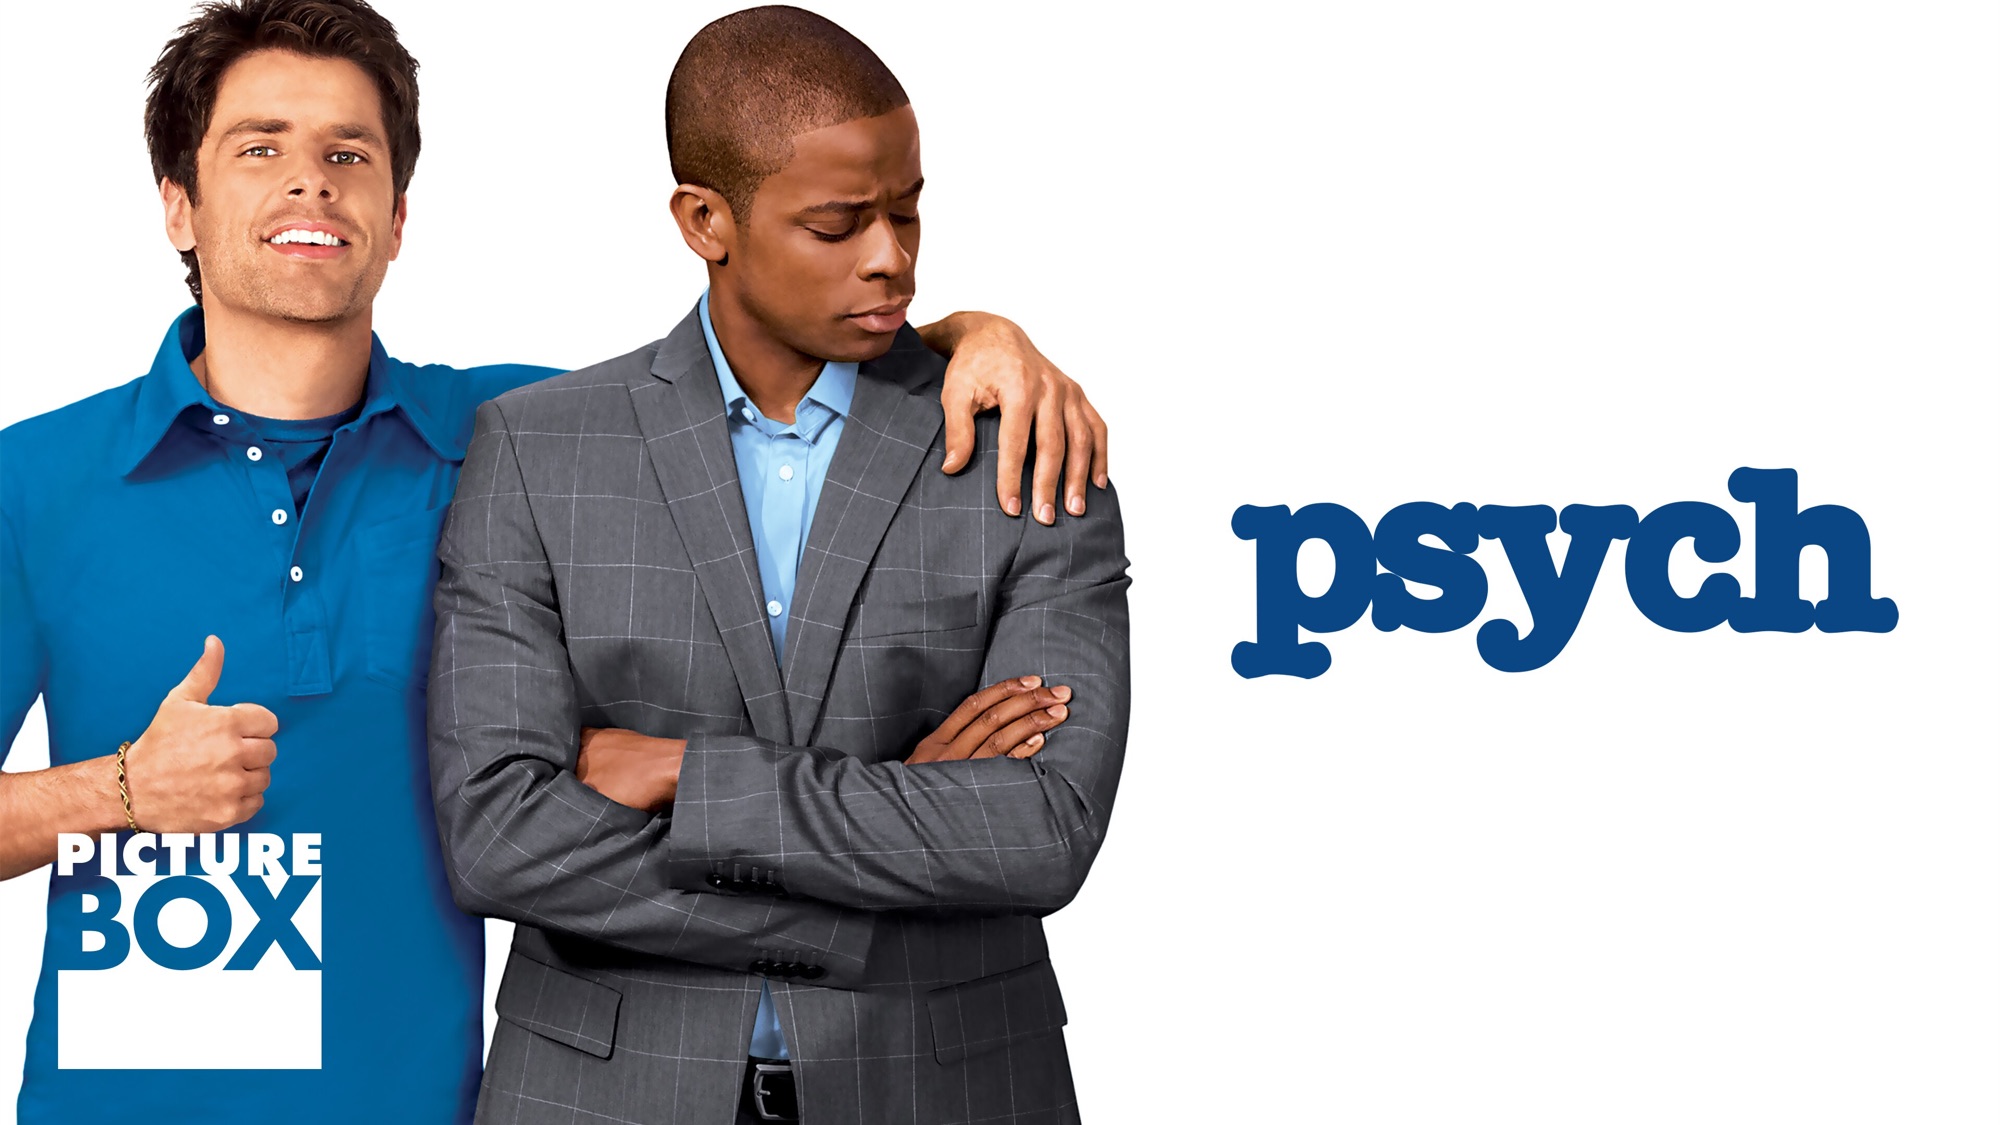 tv show, psych, dulé hill, gus (psych), james roday rodriguez, shawn spencer